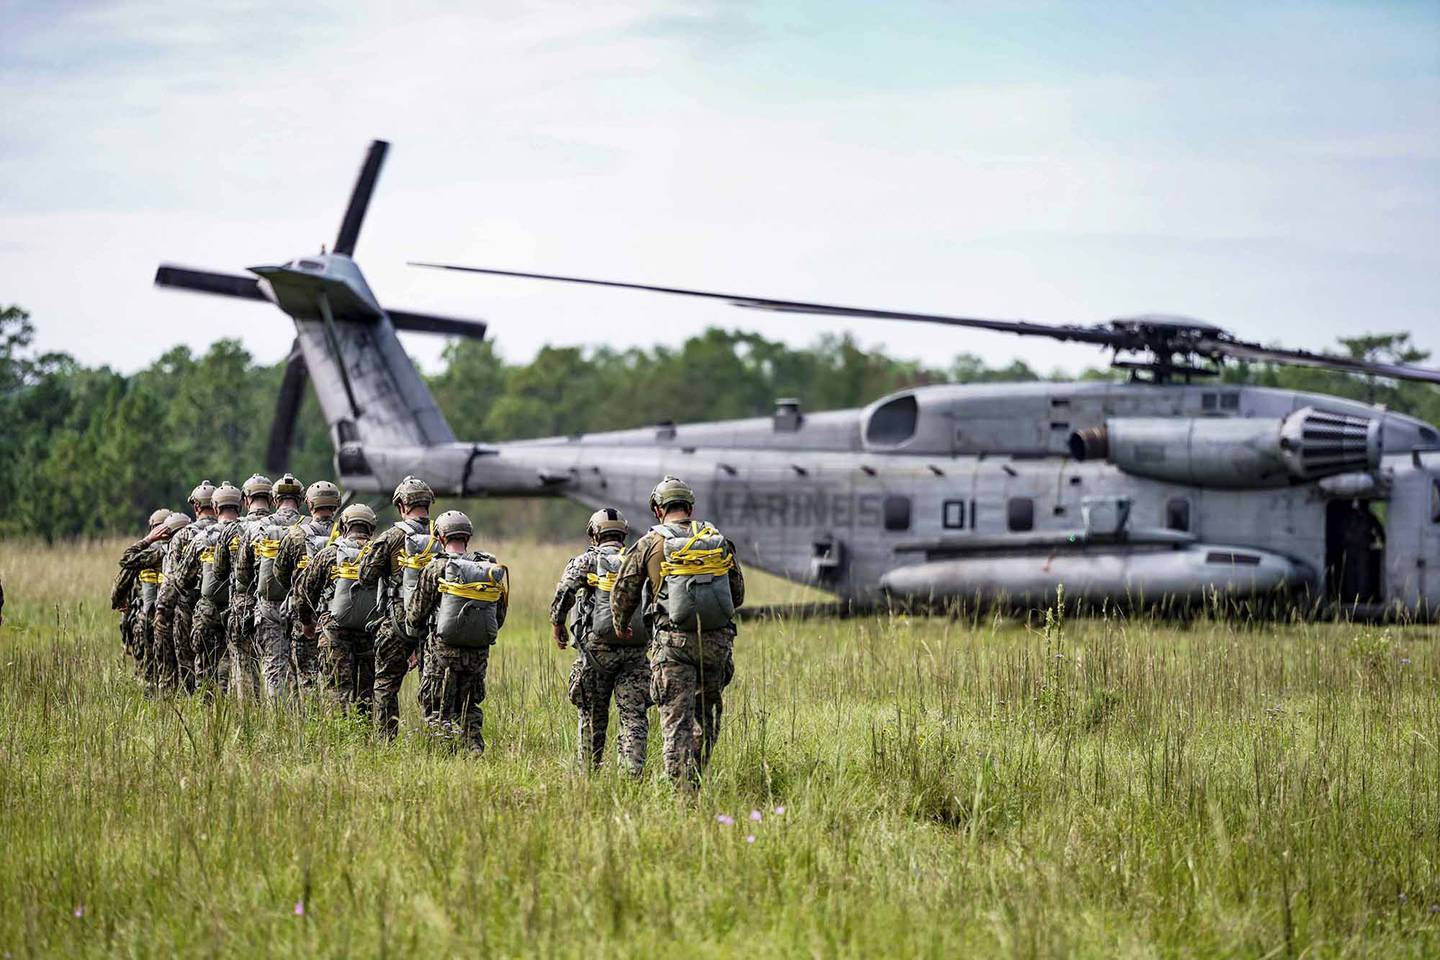 Marines with 3rd Force Reconnaissance Company, 4th Marine Division prepare to static line jump out of a CH-53 Super Stallion during an airborne operations event at Camp Shelby, Miss., Oct. 6, 2020.